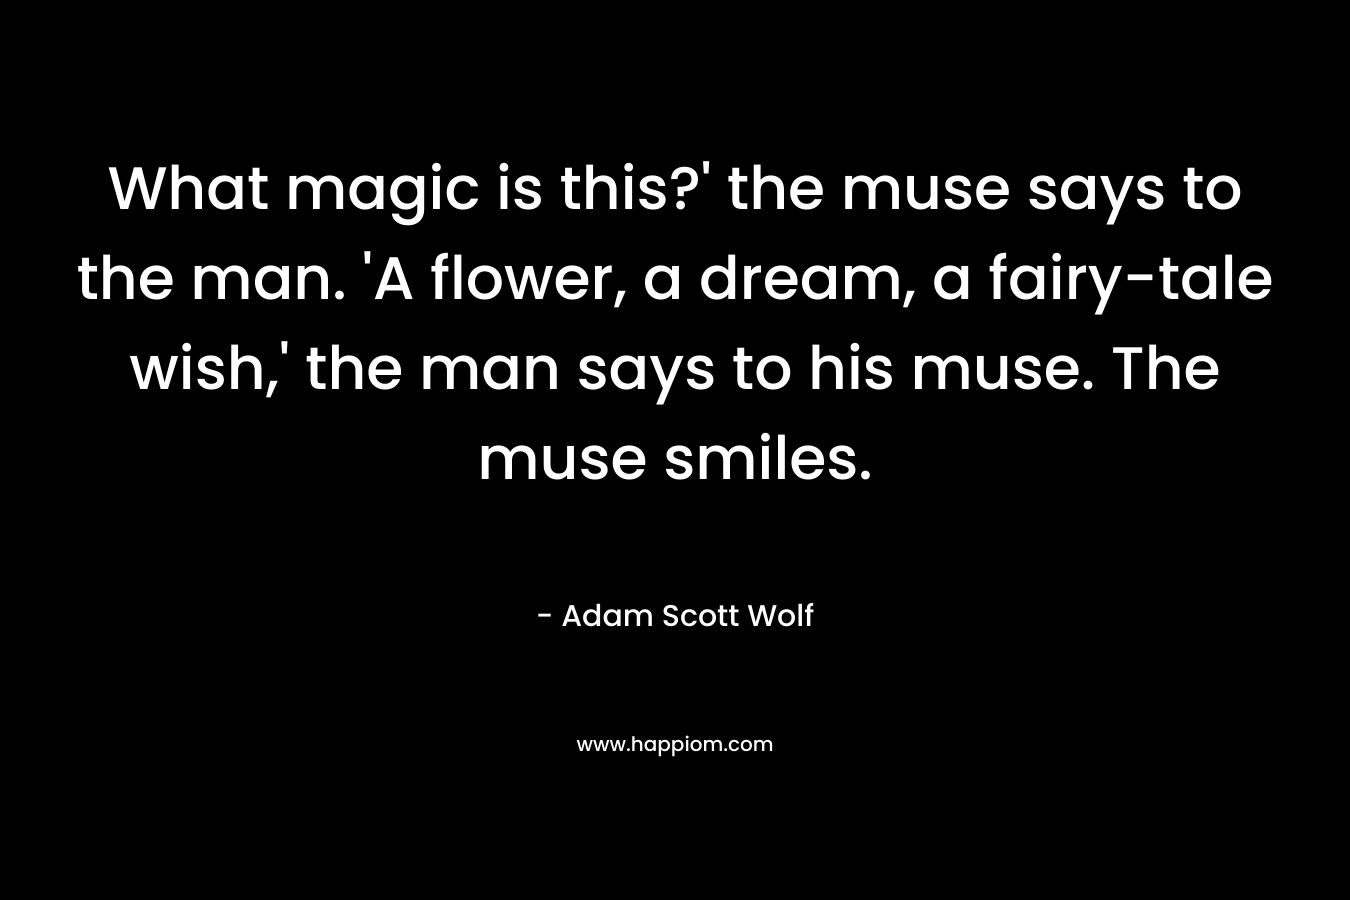 What magic is this?' the muse says to the man. 'A flower, a dream, a fairy-tale wish,' the man says to his muse. The muse smiles.